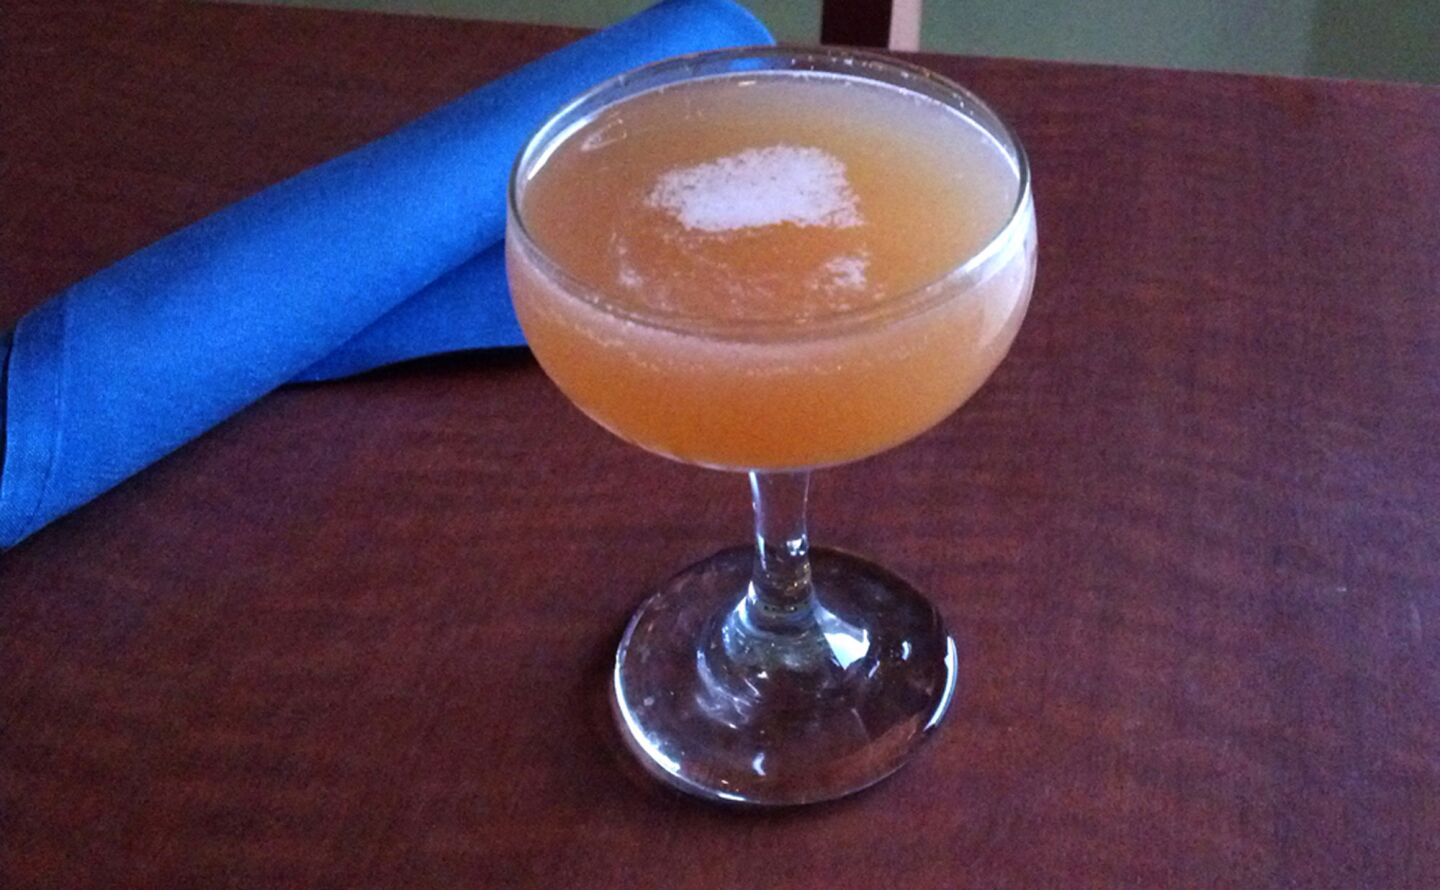 The Sargento Pimiento cocktail at Jack's Bistro